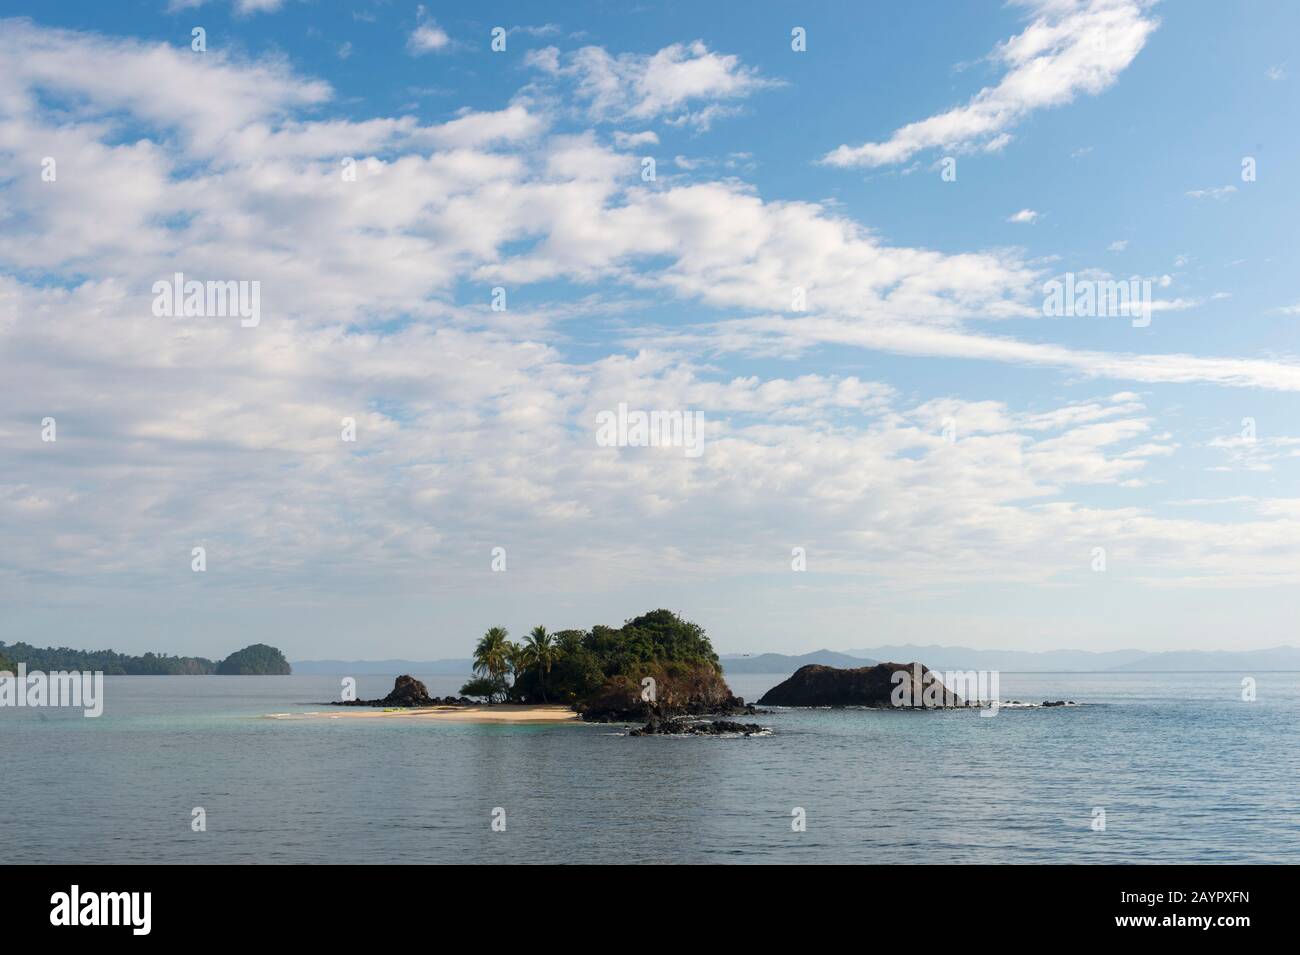 View of the small island of Granito de Oro in Coiba National Park in Panama. Stock Photo